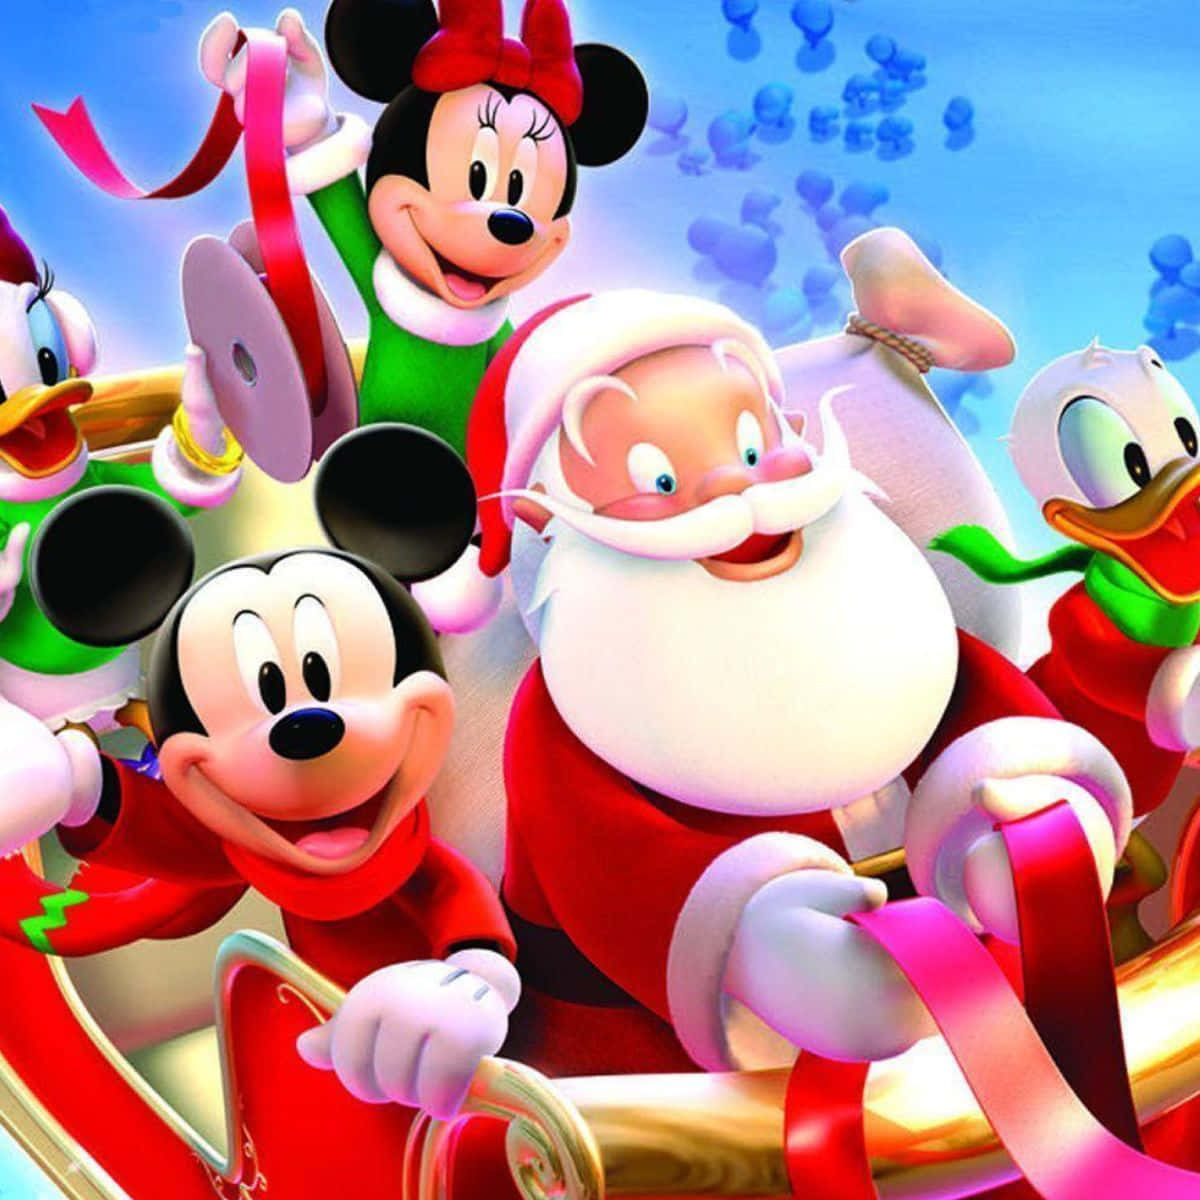 Celebrate the Holidays with Mickey, Minnie, and all your Disney pals!